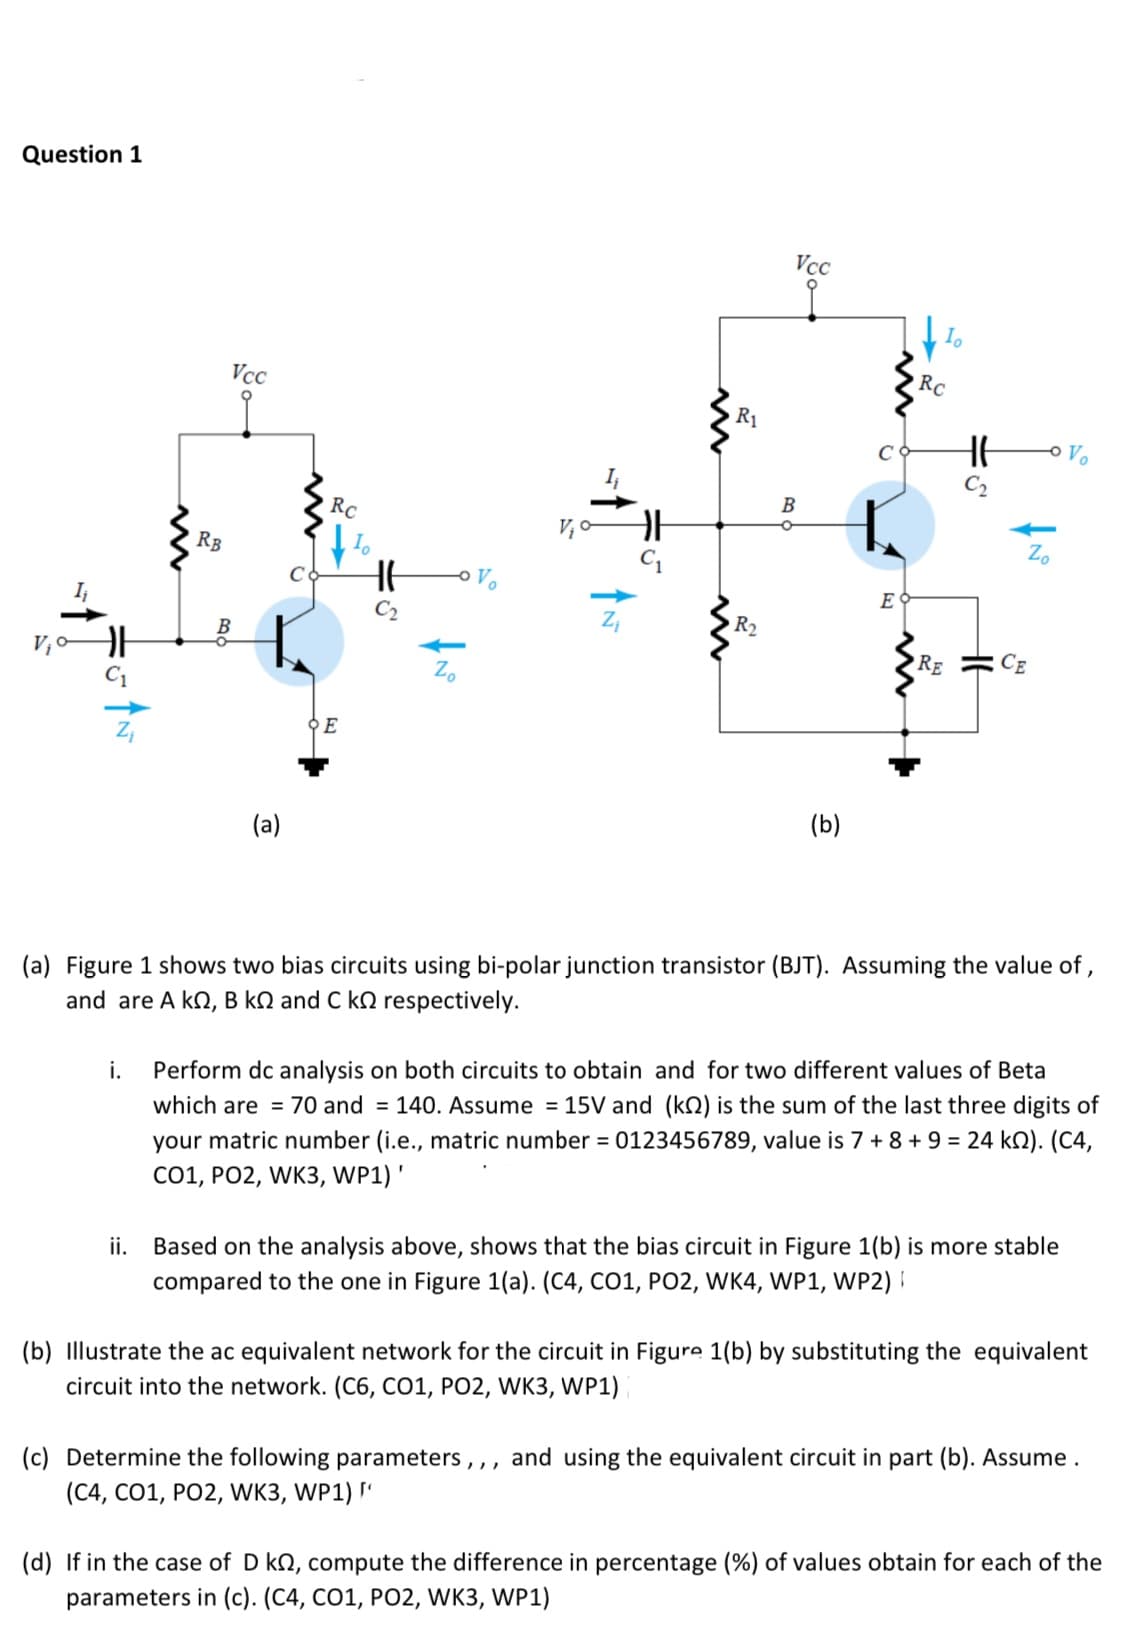 Question 1
Vcc
RC
Vcc
R1
Vo
В
RC
V;
Zo
t.
RB
Vo
E
I
C2
R2
Rɛ
CE
Zo
(b)
(a)
(a) Figure 1 shows two bias circuits using bi-polar junction transistor (BJT). Assuming the value of ,
and are A kn, B kN and C kn respectively.
i.
Perform dc analysis on both circuits to obtain and for two different values of Beta
which are = 70 and = 140. Assume = 15V and (kQ) is the sum of the last three digits of
your matric number (i.e., matric number = 0123456789, value is 7 + 8 + 9 = 24 kN). (C4,
Co1, PO2, WK3, WP1)'
ii.
Based on the analysis above, shows that the bias circuit in Figure 1(b) is more stable
compared to the one in Figure 1(a). (C4, CO1, PO2, WK4, WP1, WP2) I
(b) Illustrate the ac equivalent network for the circuit in Figure 1(b) by substituting the equivalent
circuit into the network. (C6, C01, PO2, WK3, WP1)
(c) Determine the following parameters,,, and using the equivalent circuit in part (b). Assume.
(C4, CO1, PO2, WK3, WP1) "
(d) If in the case of D kN, compute the difference in percentage (%) of values obtain for each of the
parameters in (c). (C4, CO1, PO2, WK3, WP1)
